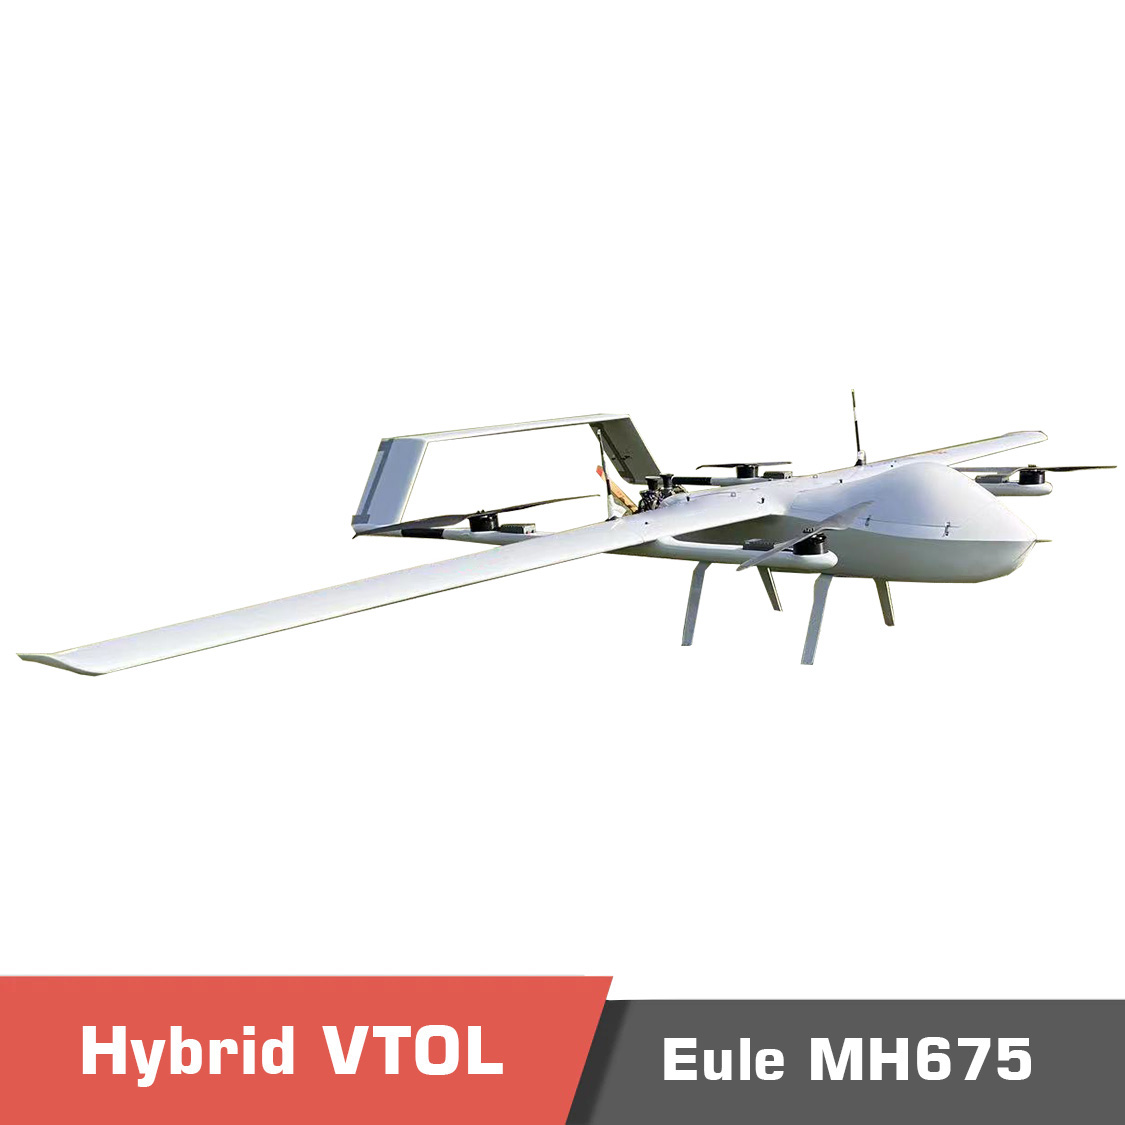 Temp eule mh675. 5 - mfe fighter hand throw,mfe fighter,fighter hand-throw version,tool-less disassembly and assembly,long endurance,fixedwing uav,cargo drone,conventional aerodynamic drone,long-range aerial mapping platform,high-capacity vtol uav,precision agriculture drone,engineering survey uav,environmental monitoring platform,fixed-wing flight equipment,topographic mapping uav,drone for land surveying - motionew - 1